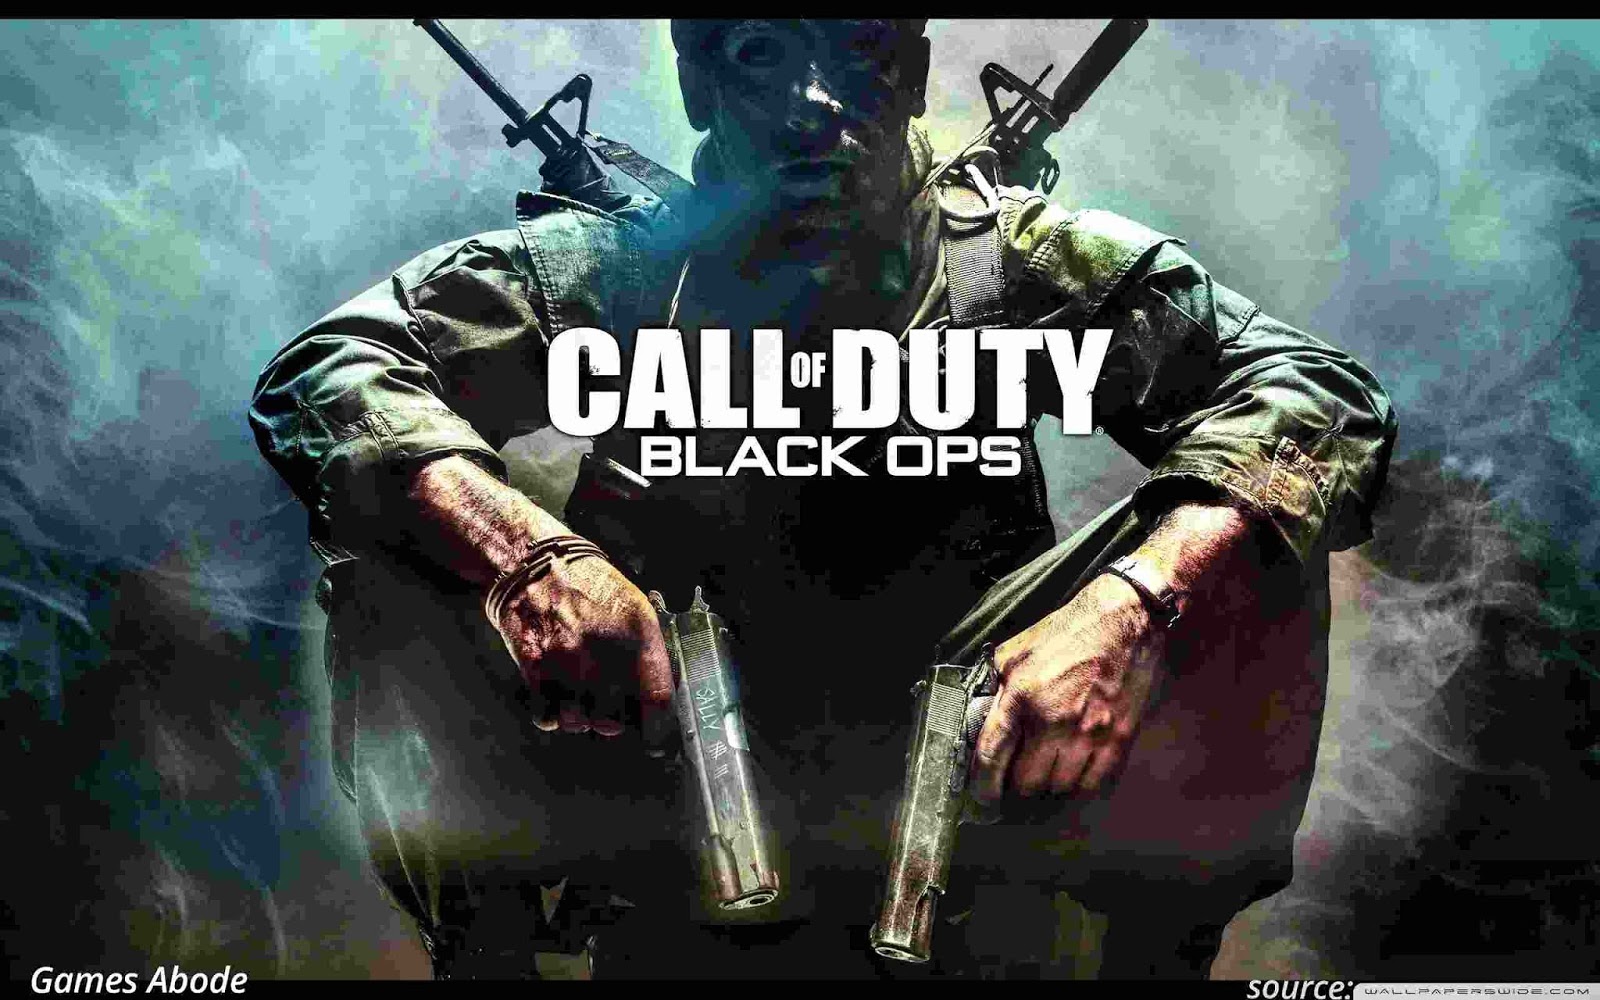 Call of duty black ops pc download highly compressed - ffopspirit